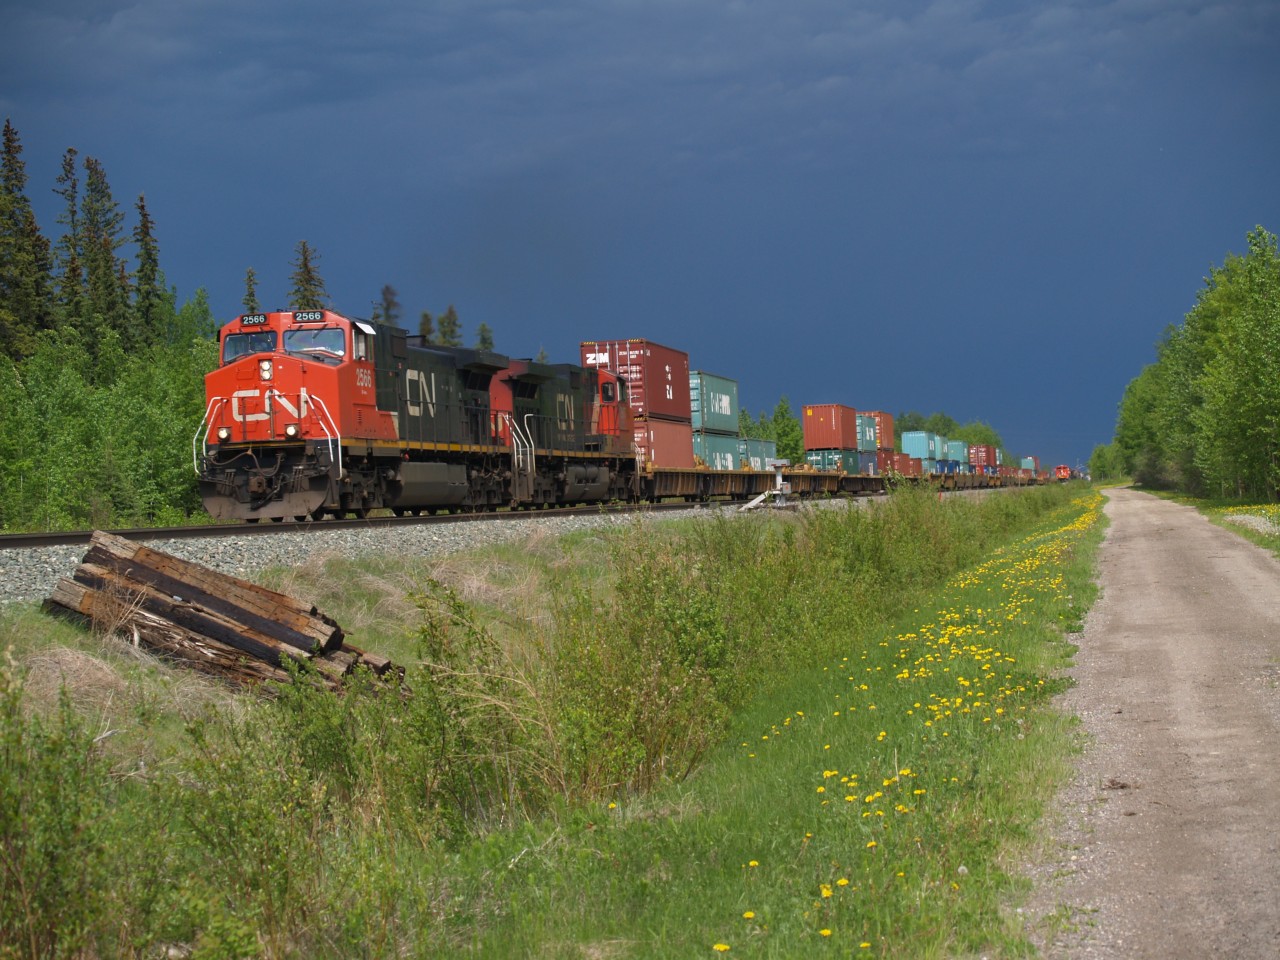 CN105 overtakes CN549 in near perfect storm light conditions